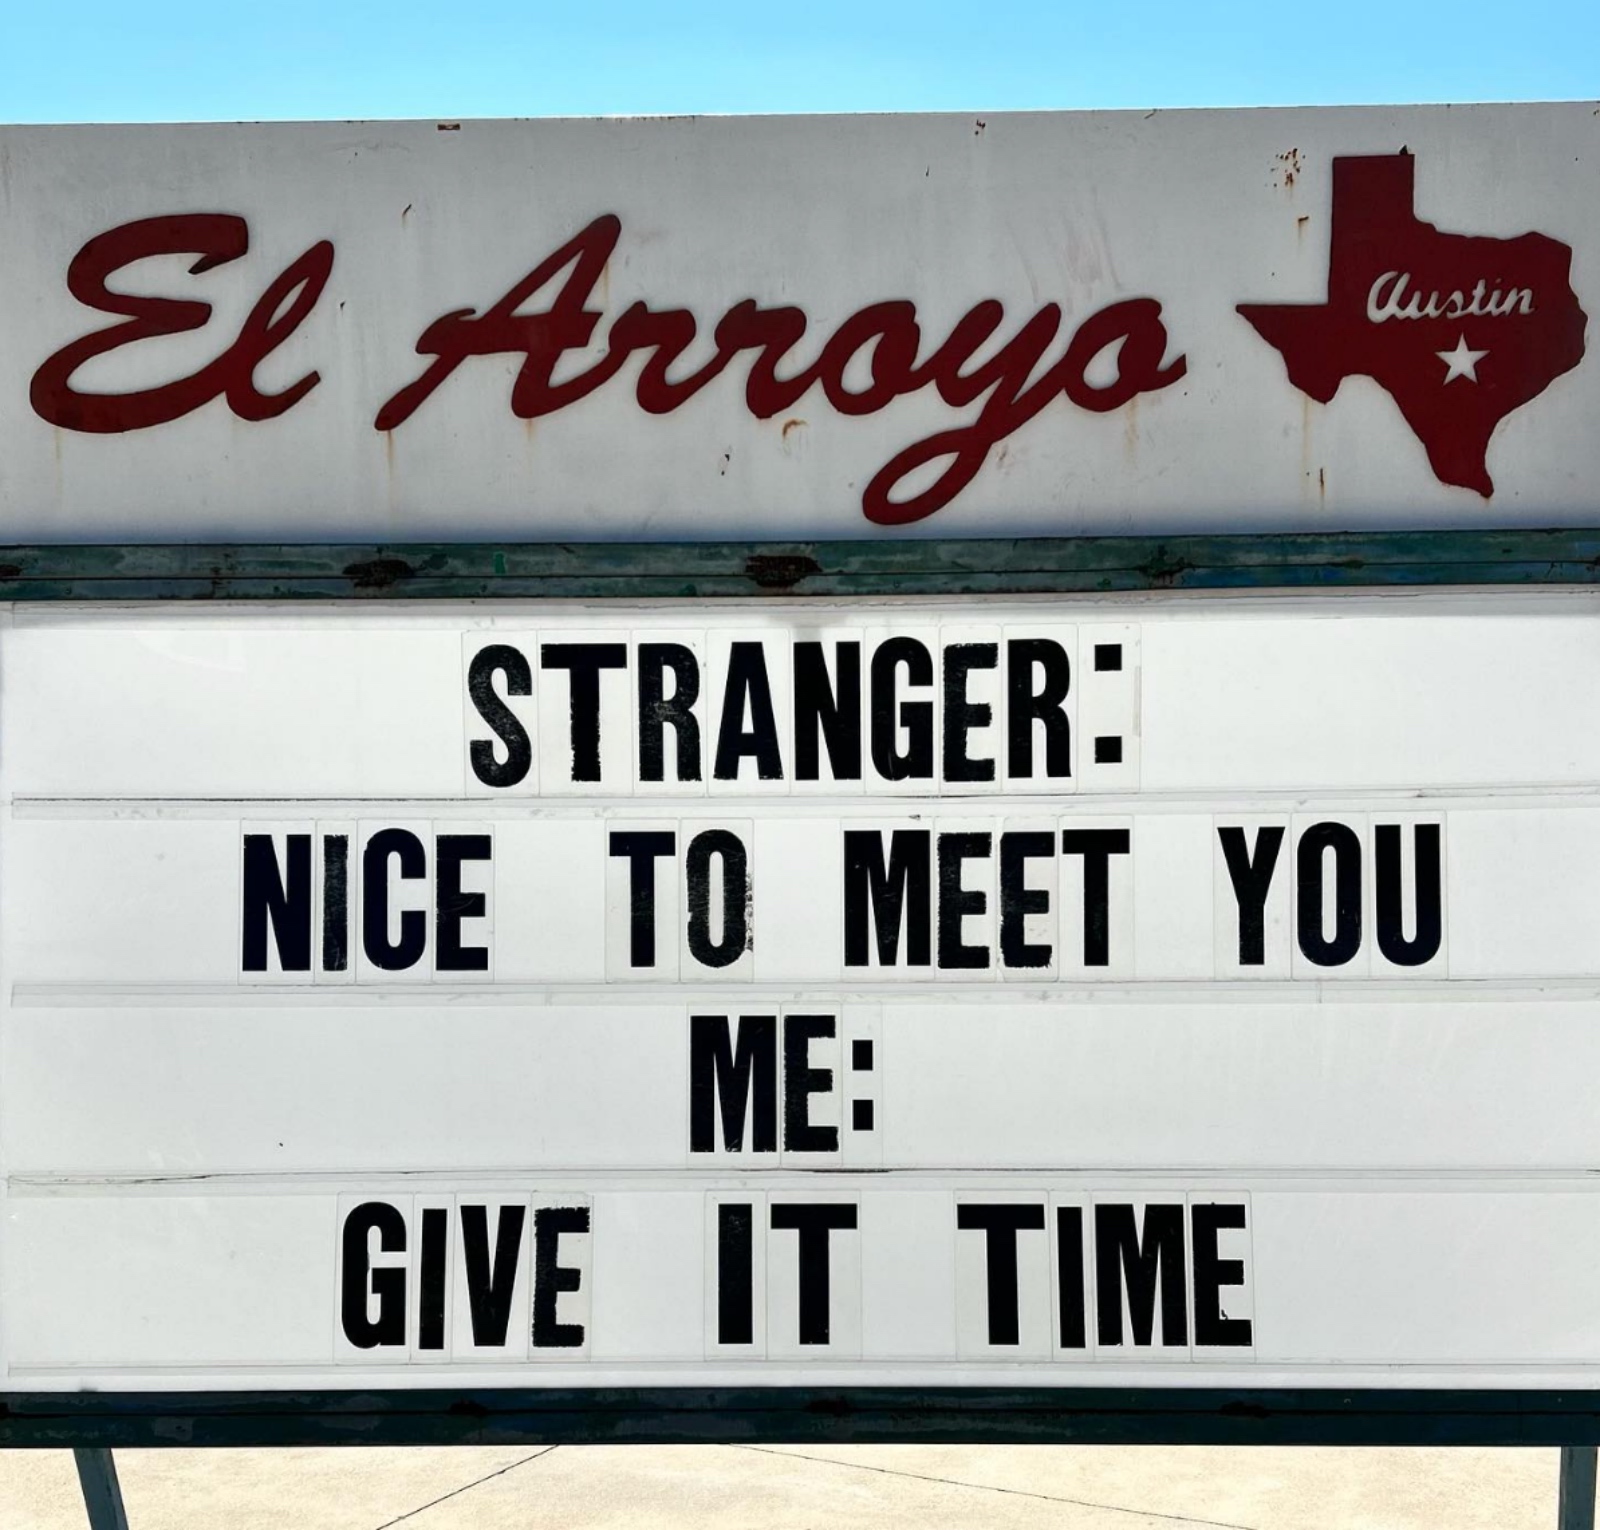 funny meme about meeting strangers